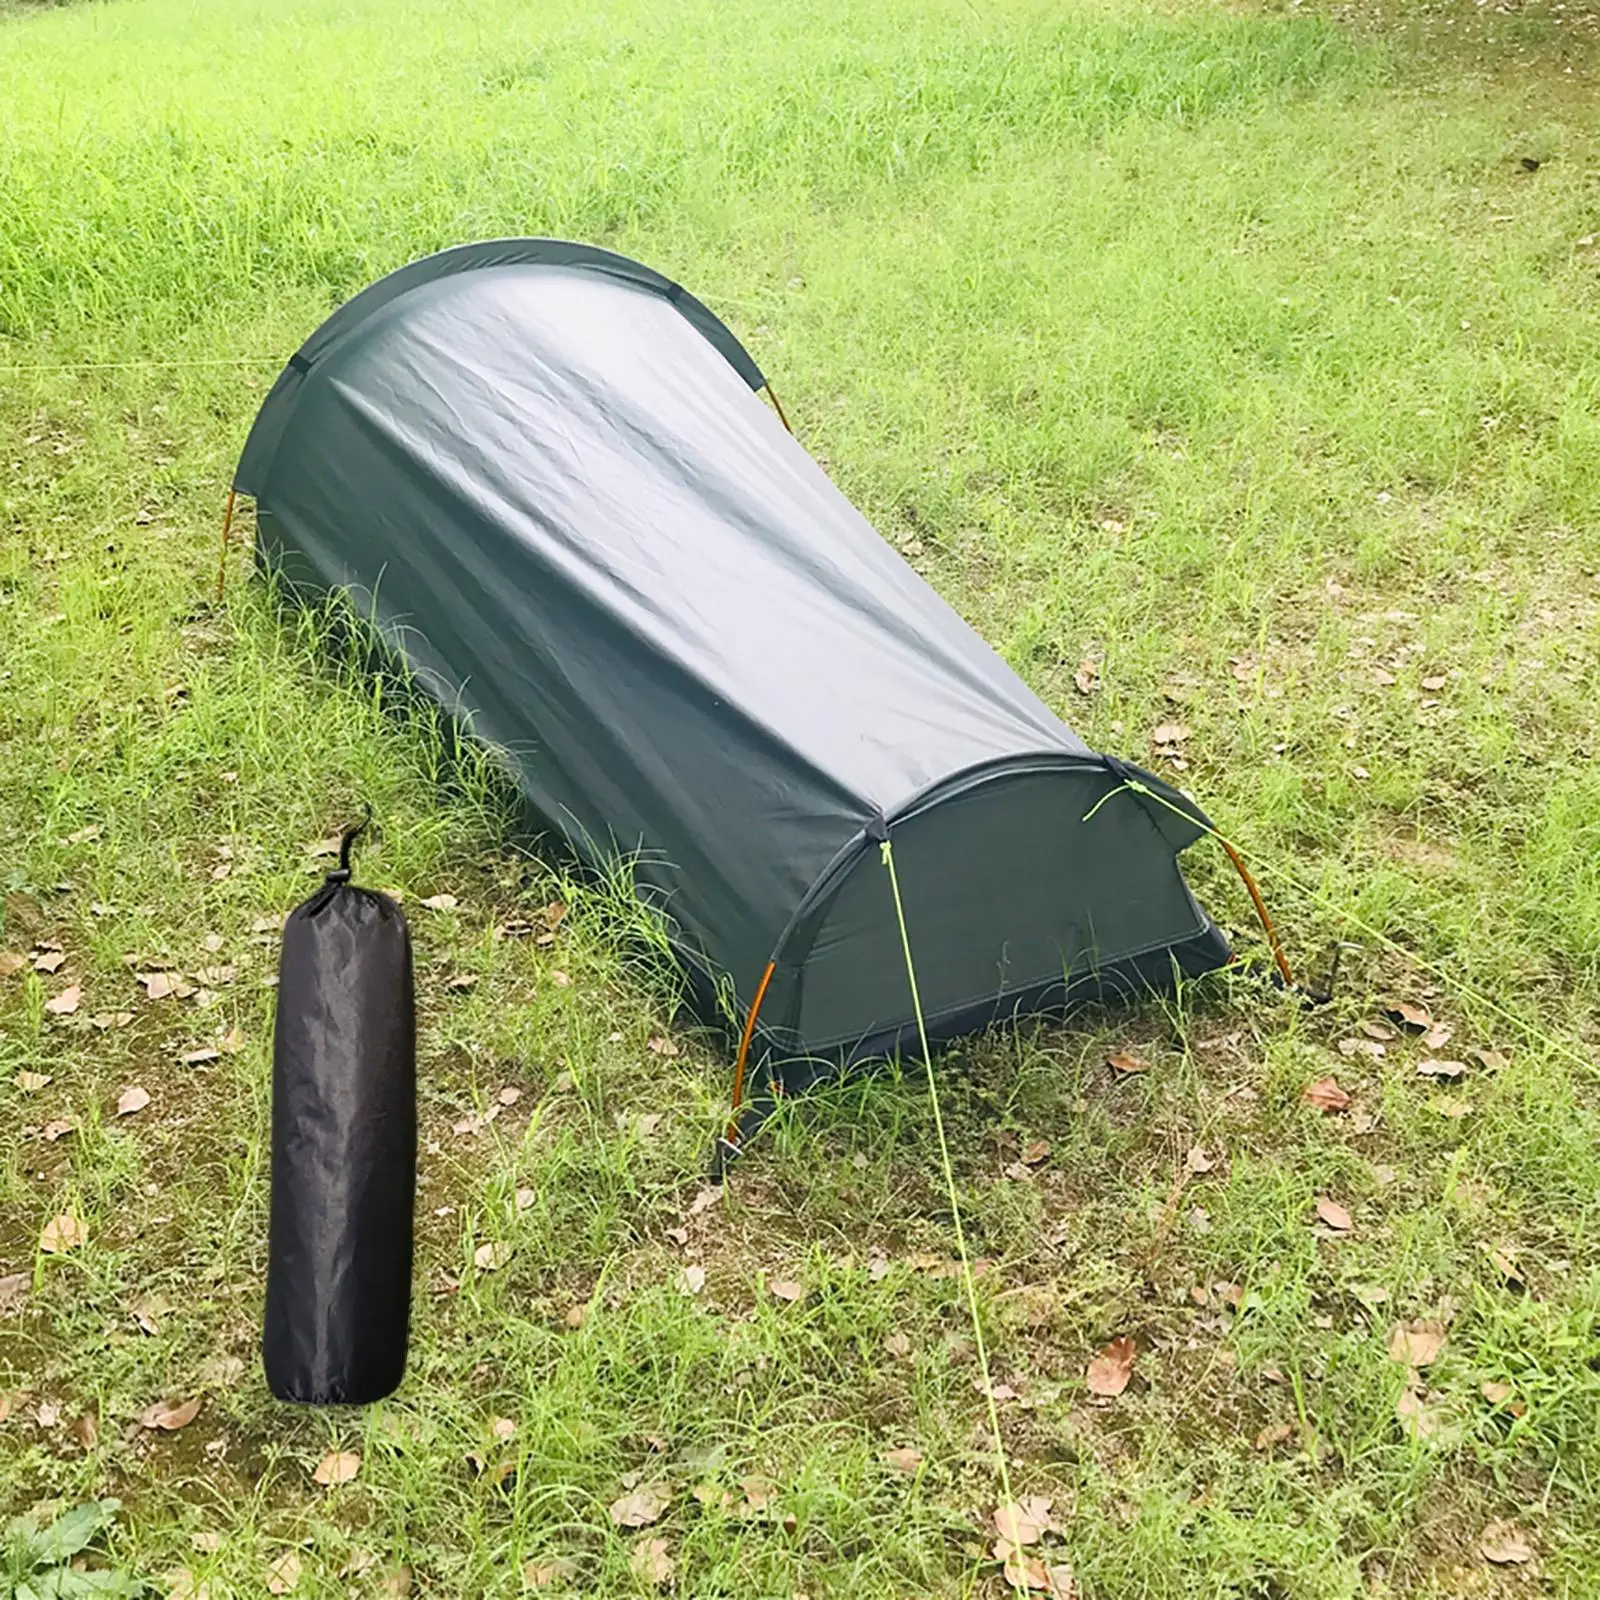 Portable Camping Tent Waterproof Single Person Easy Set up Bushcraft Shelter for All Seasons Backpacking Fishing Survival Beach